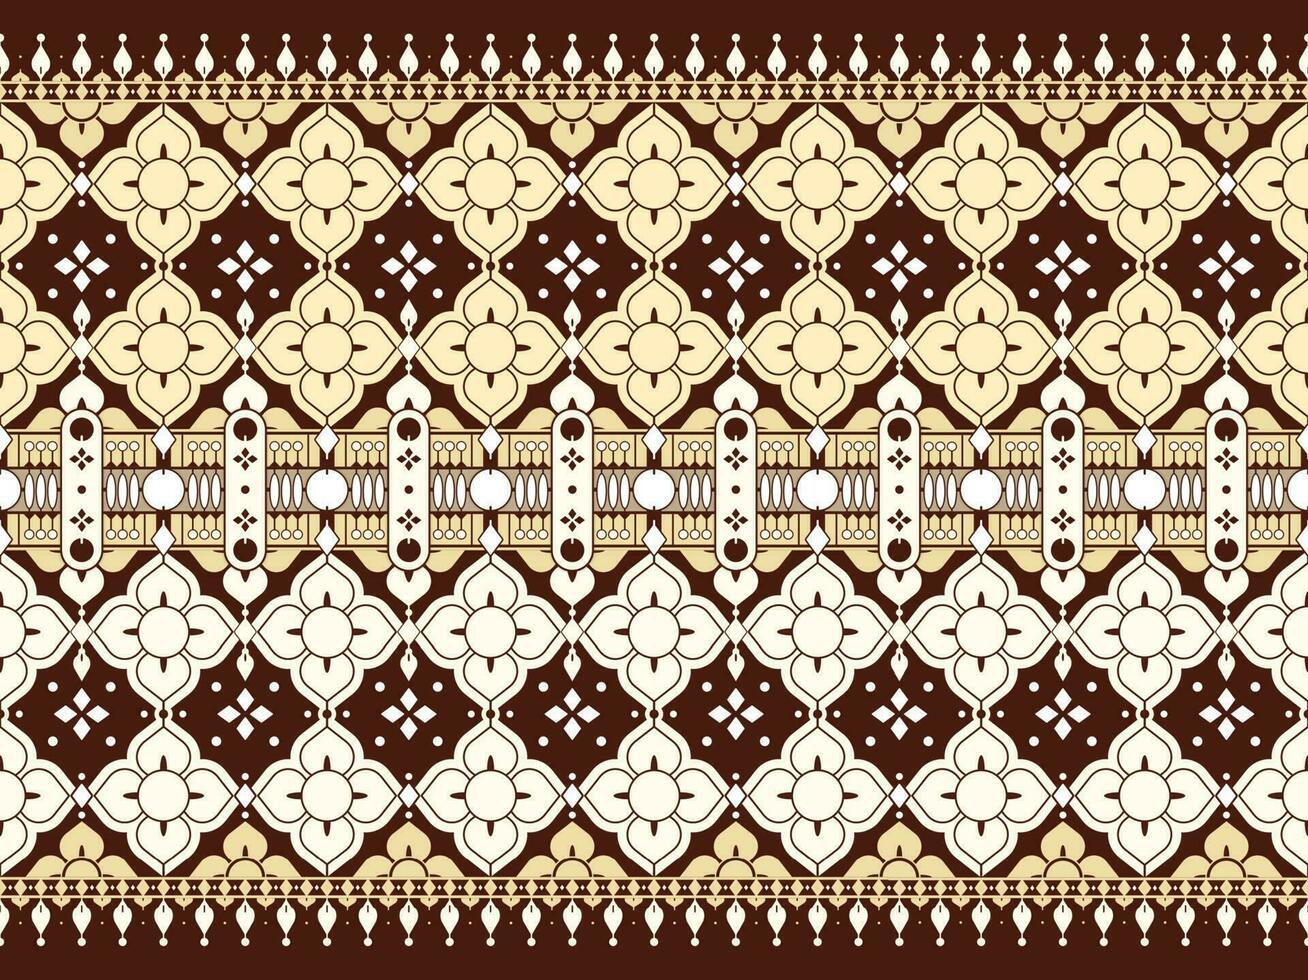 geometric and flower ethnic fabric pattern for cloth carpet wallpaper background wrapping etc. vector